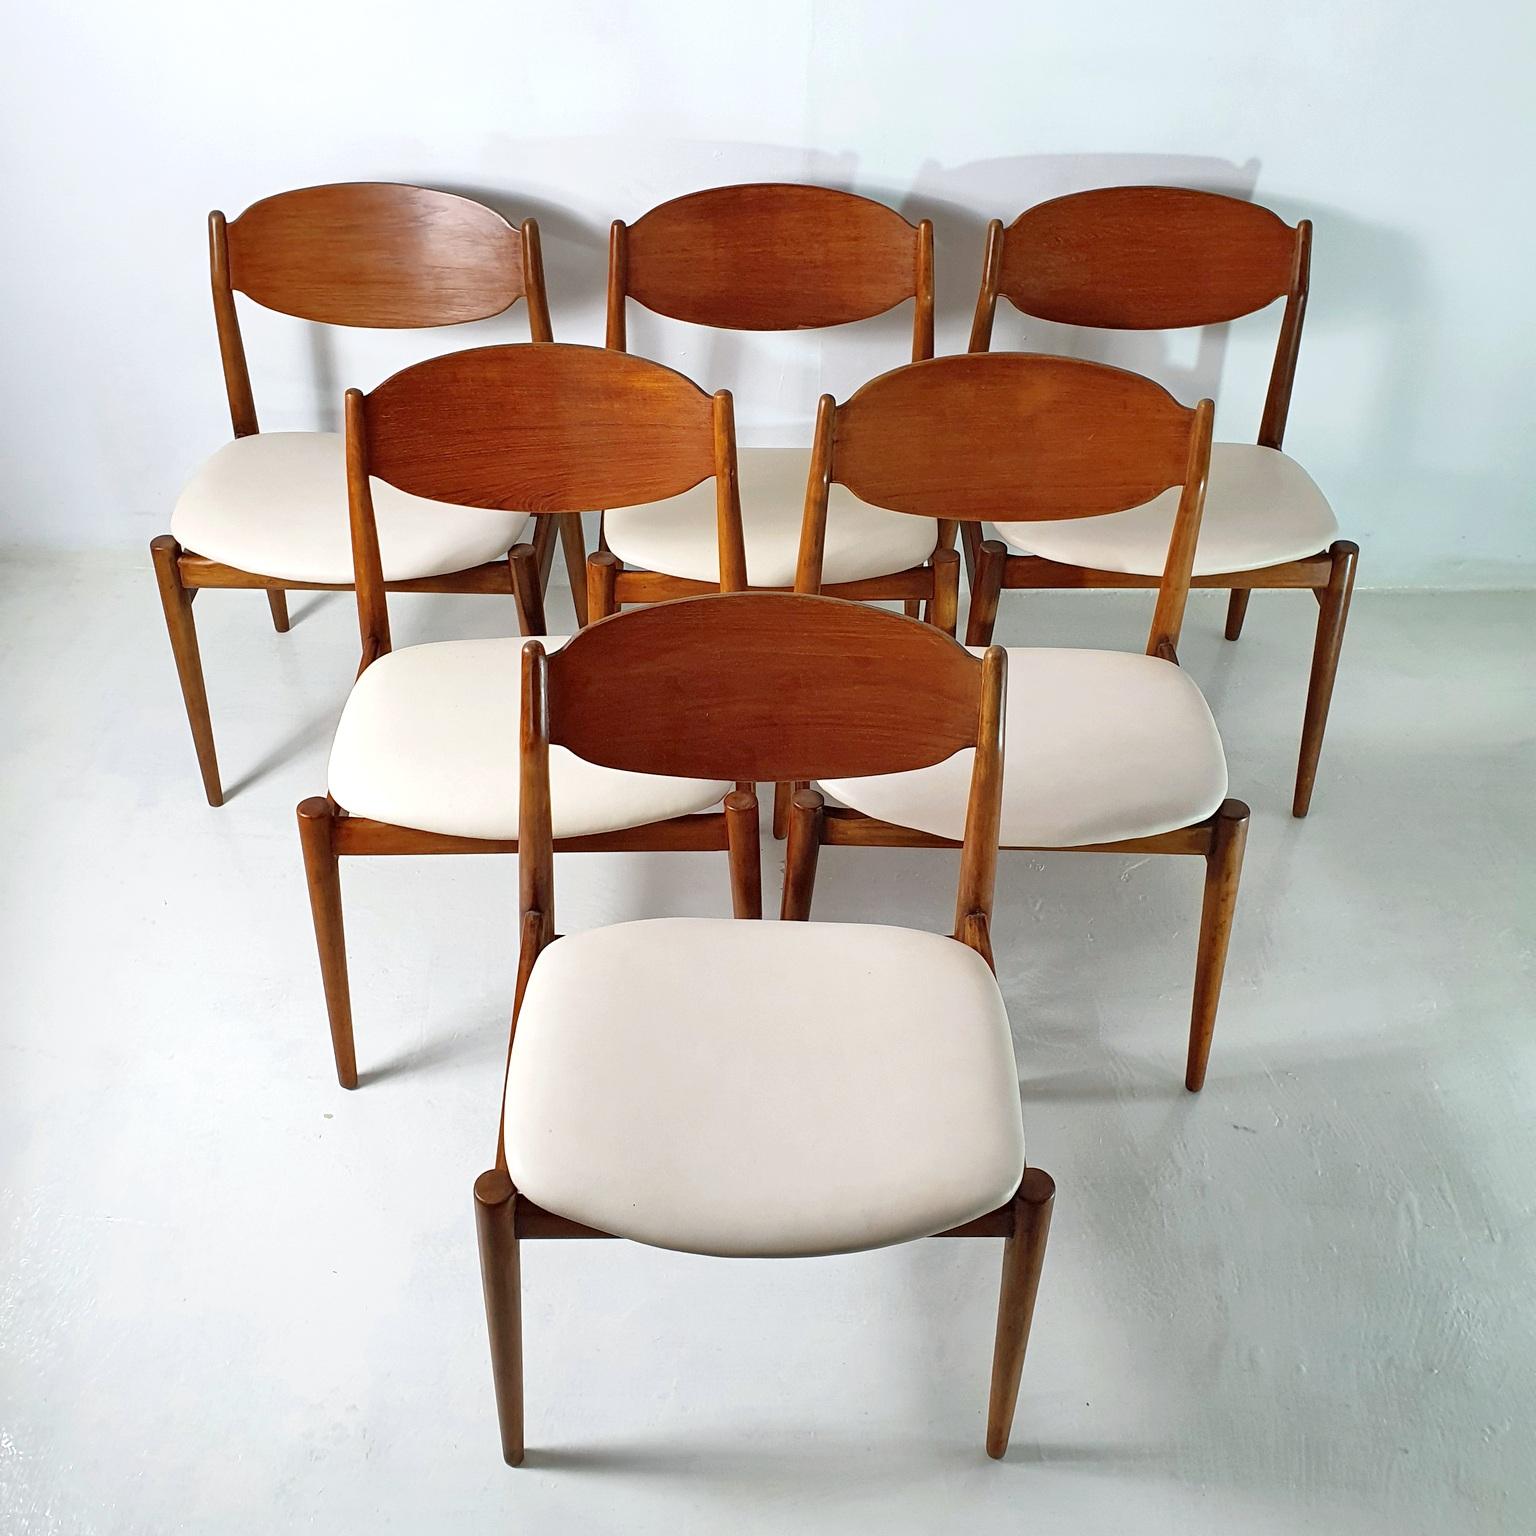 
Transform your dining space into a chic and elegant haven with the exquisite craftsmanship of four dining chairs designed by renowned designer Leonardi Fiori for ISA Bergamo. These chairs are made from teak wood, a symbol of quality and durability,